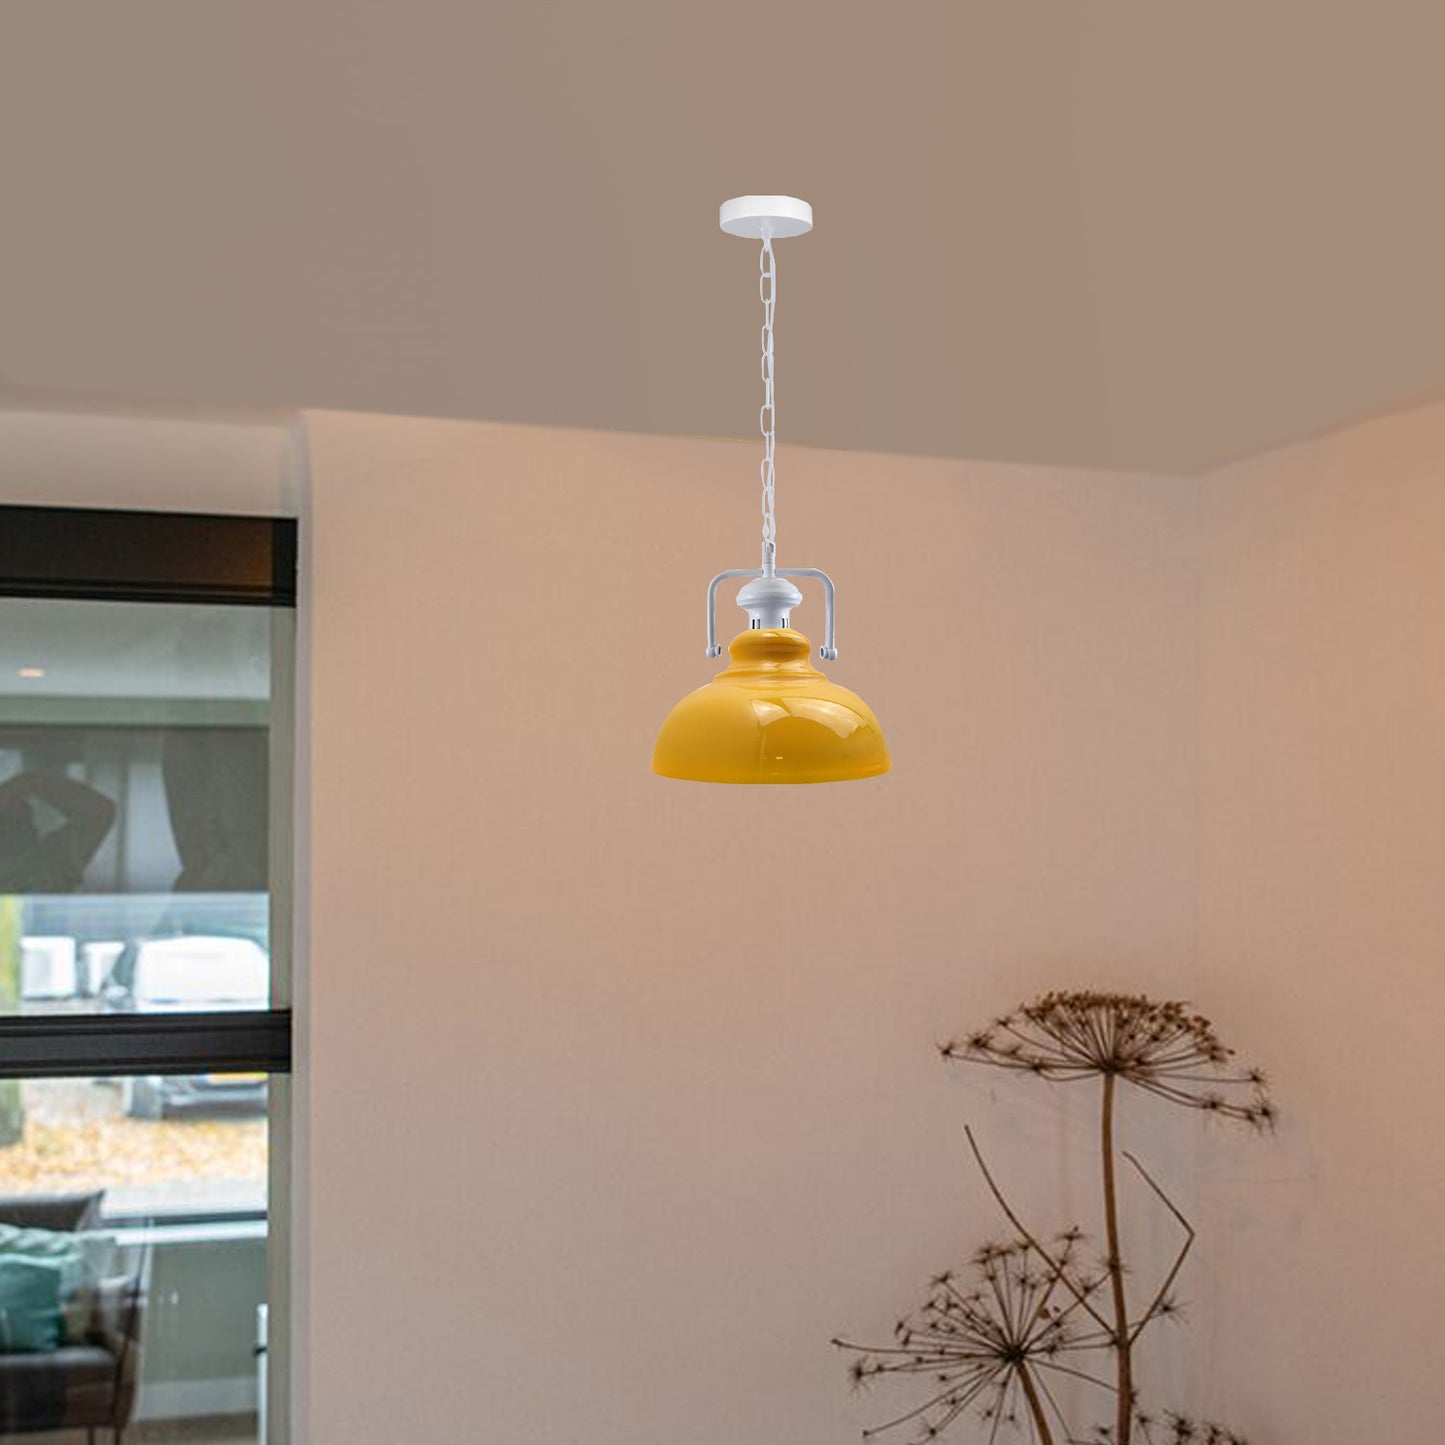 Indoor Yellow Retro Ceiling Metal Barn Pendant Ceiling Light Fixture for providing warmth and welcoming to your kitchen or living room~2277